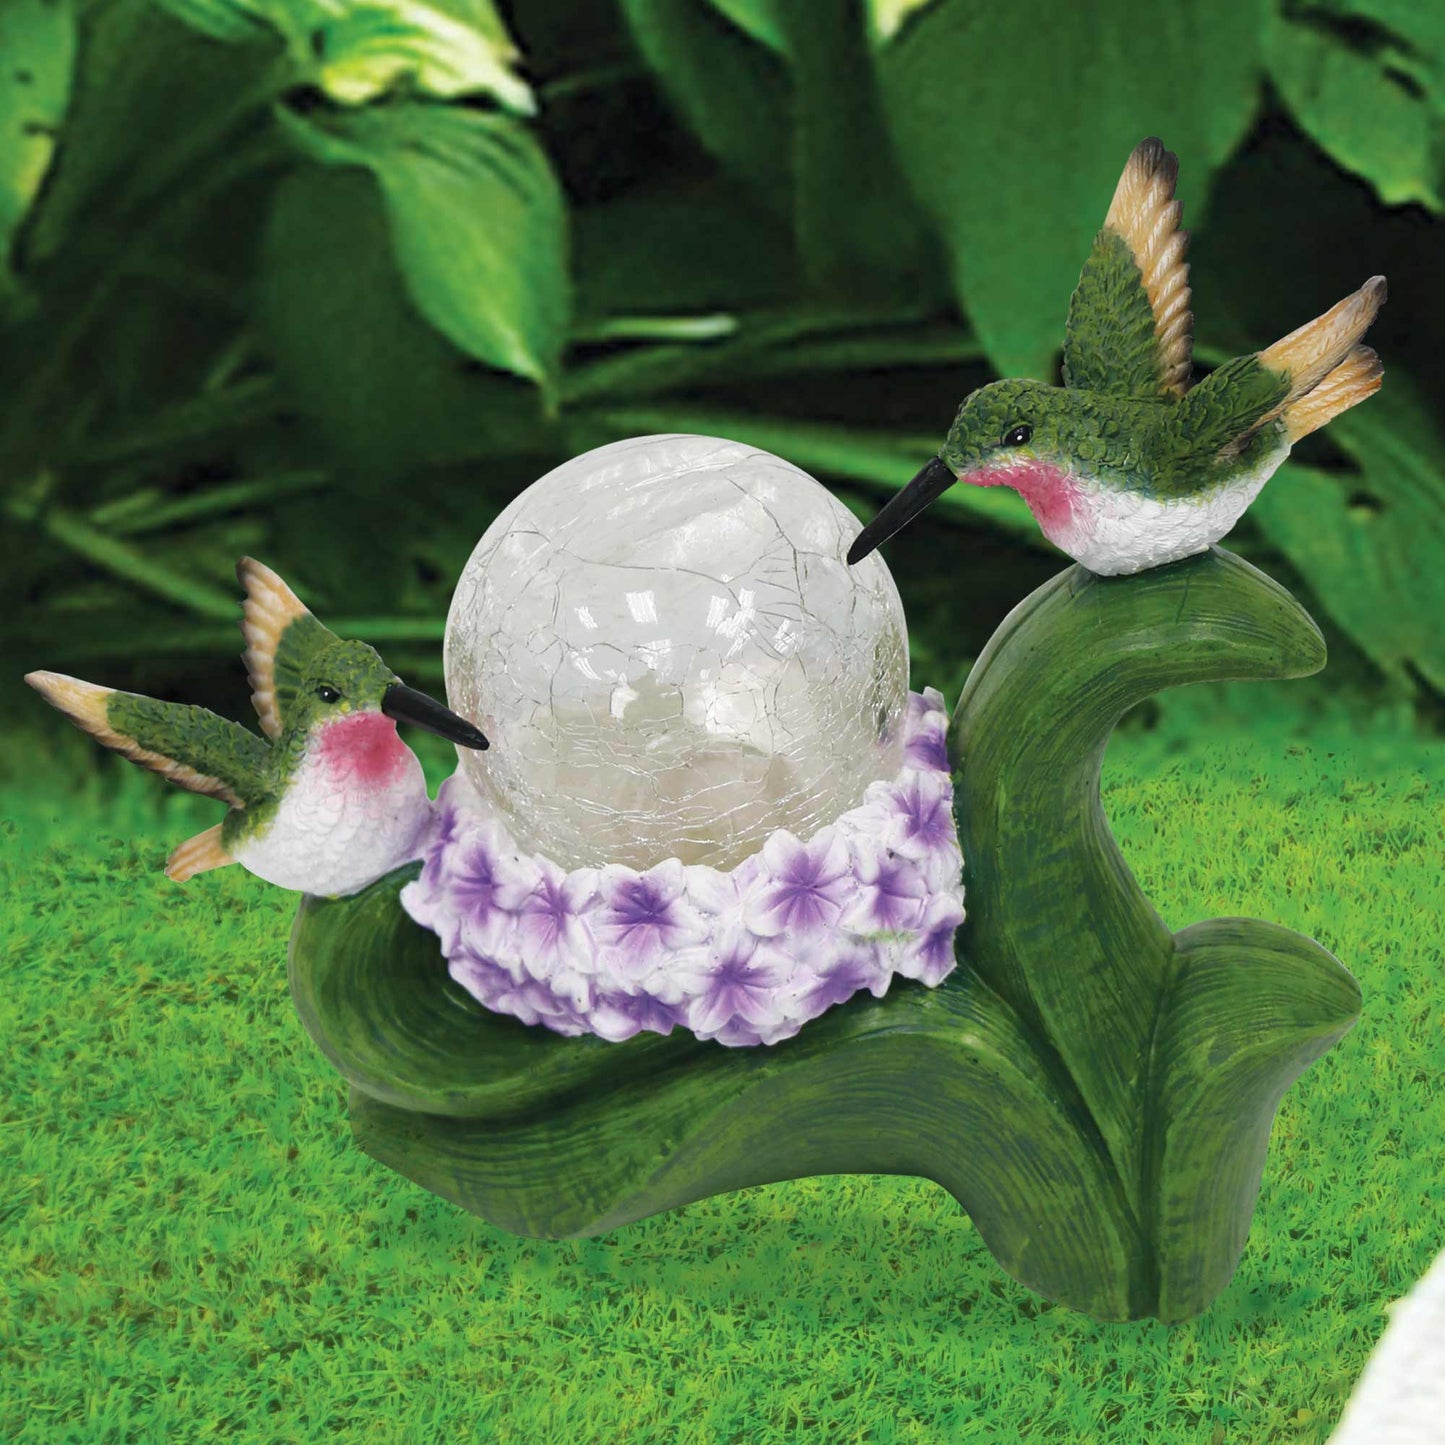 Silver & Stone Outdoor Solar Ornament Hummingbirds with Crackle Ball - Purple Flowers